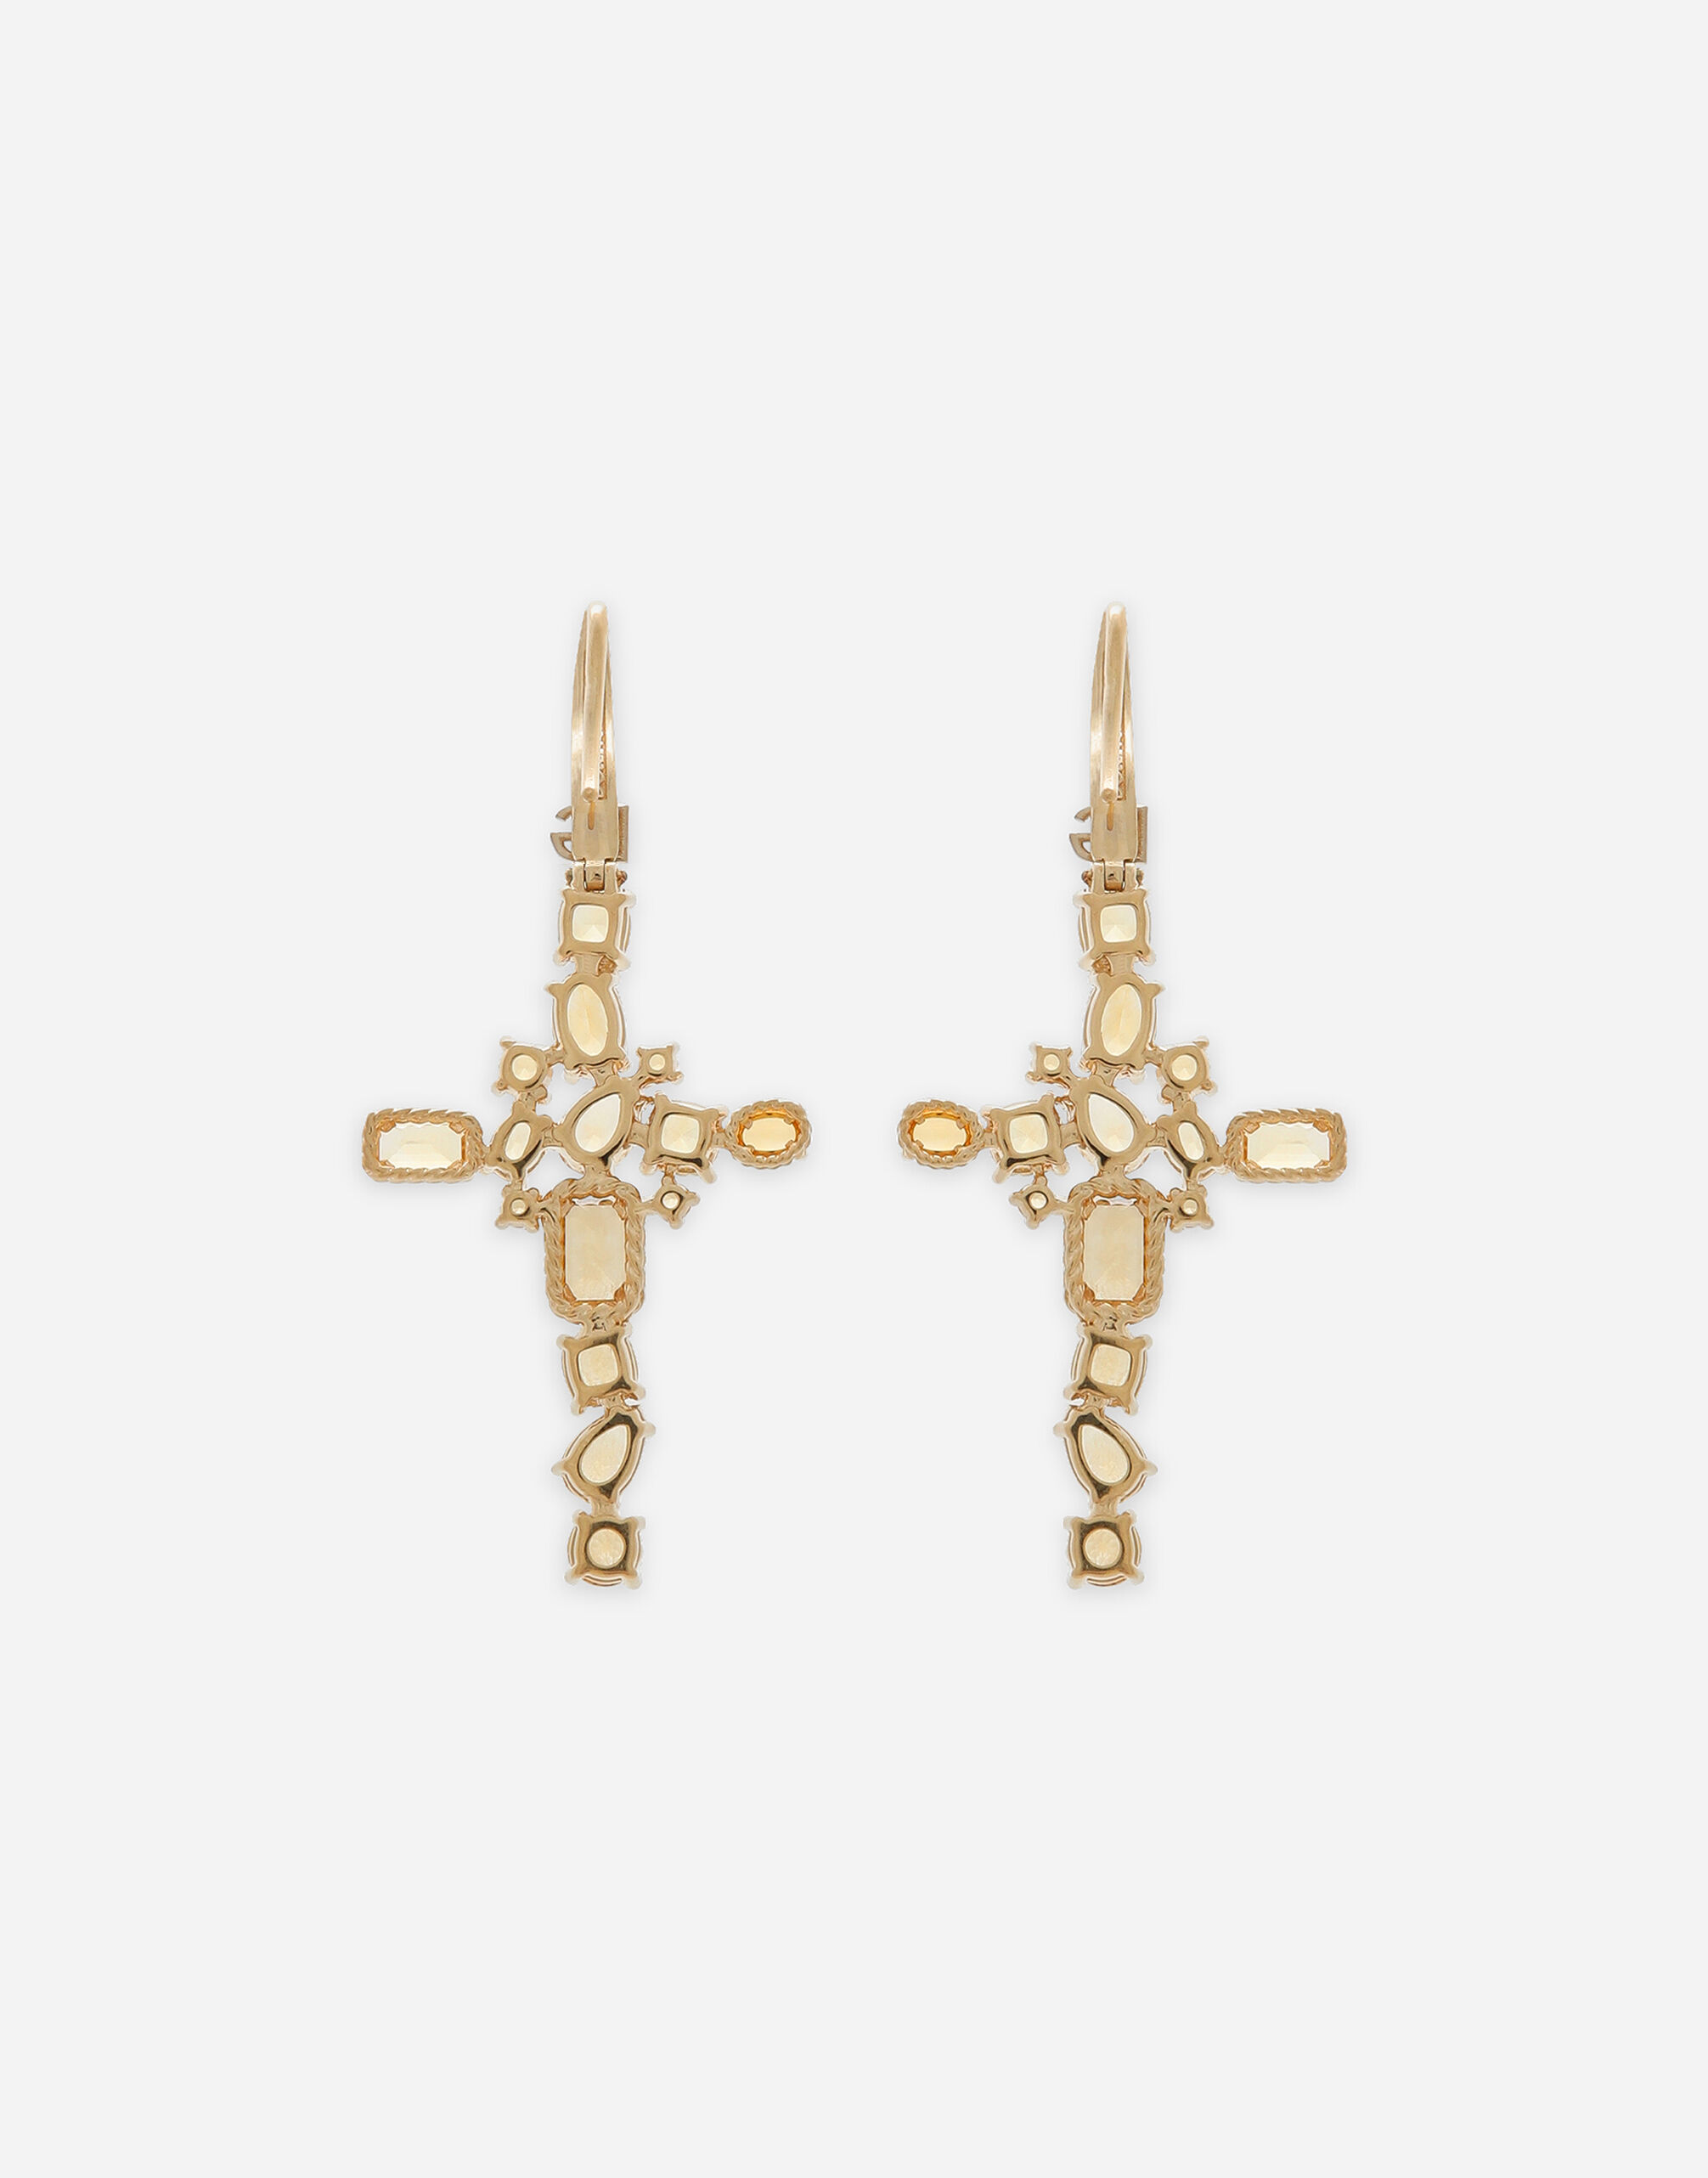 Anna earrings in yellow gold 18kt with citrine quartzes in Gold 